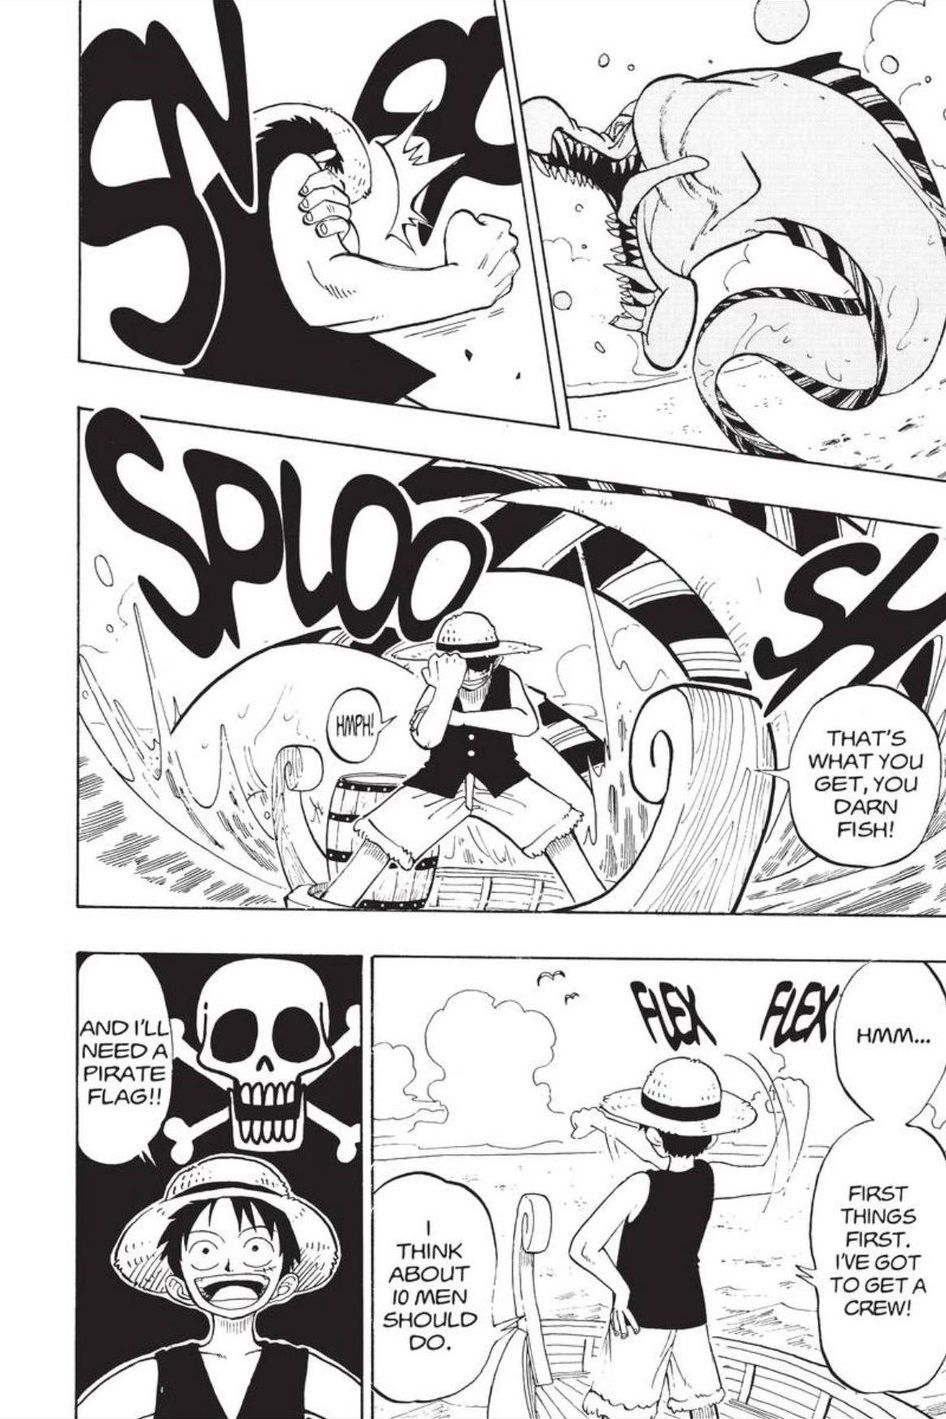 One Piece manga chapter 1, part 2 Luffy facing the sea monster